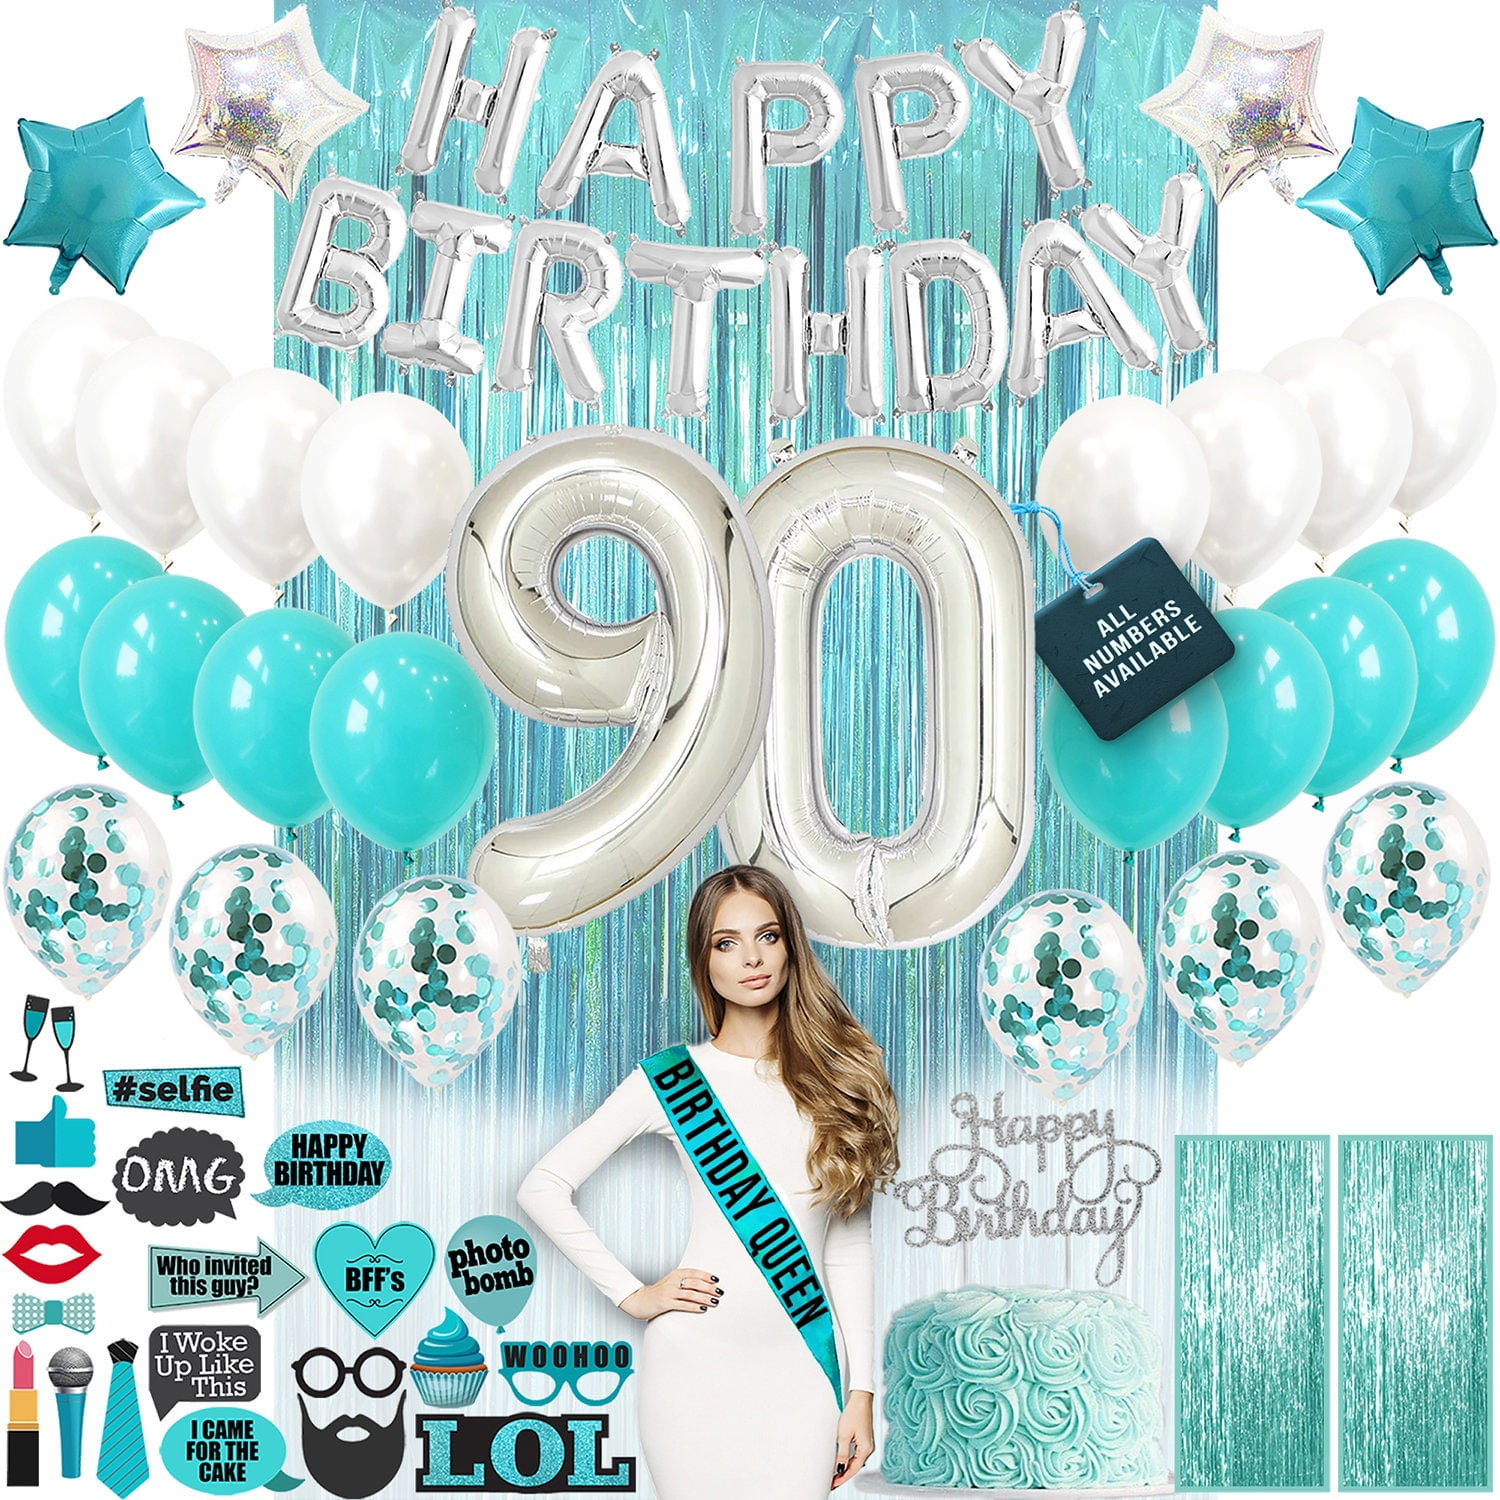 90th Birthday Decorations, 90th Birthday Party Supplies, 90th Birthday Banner Teal Green, Confetti Balloons Her, 90 Cake Topper, 90th Gifts - Walmart.com